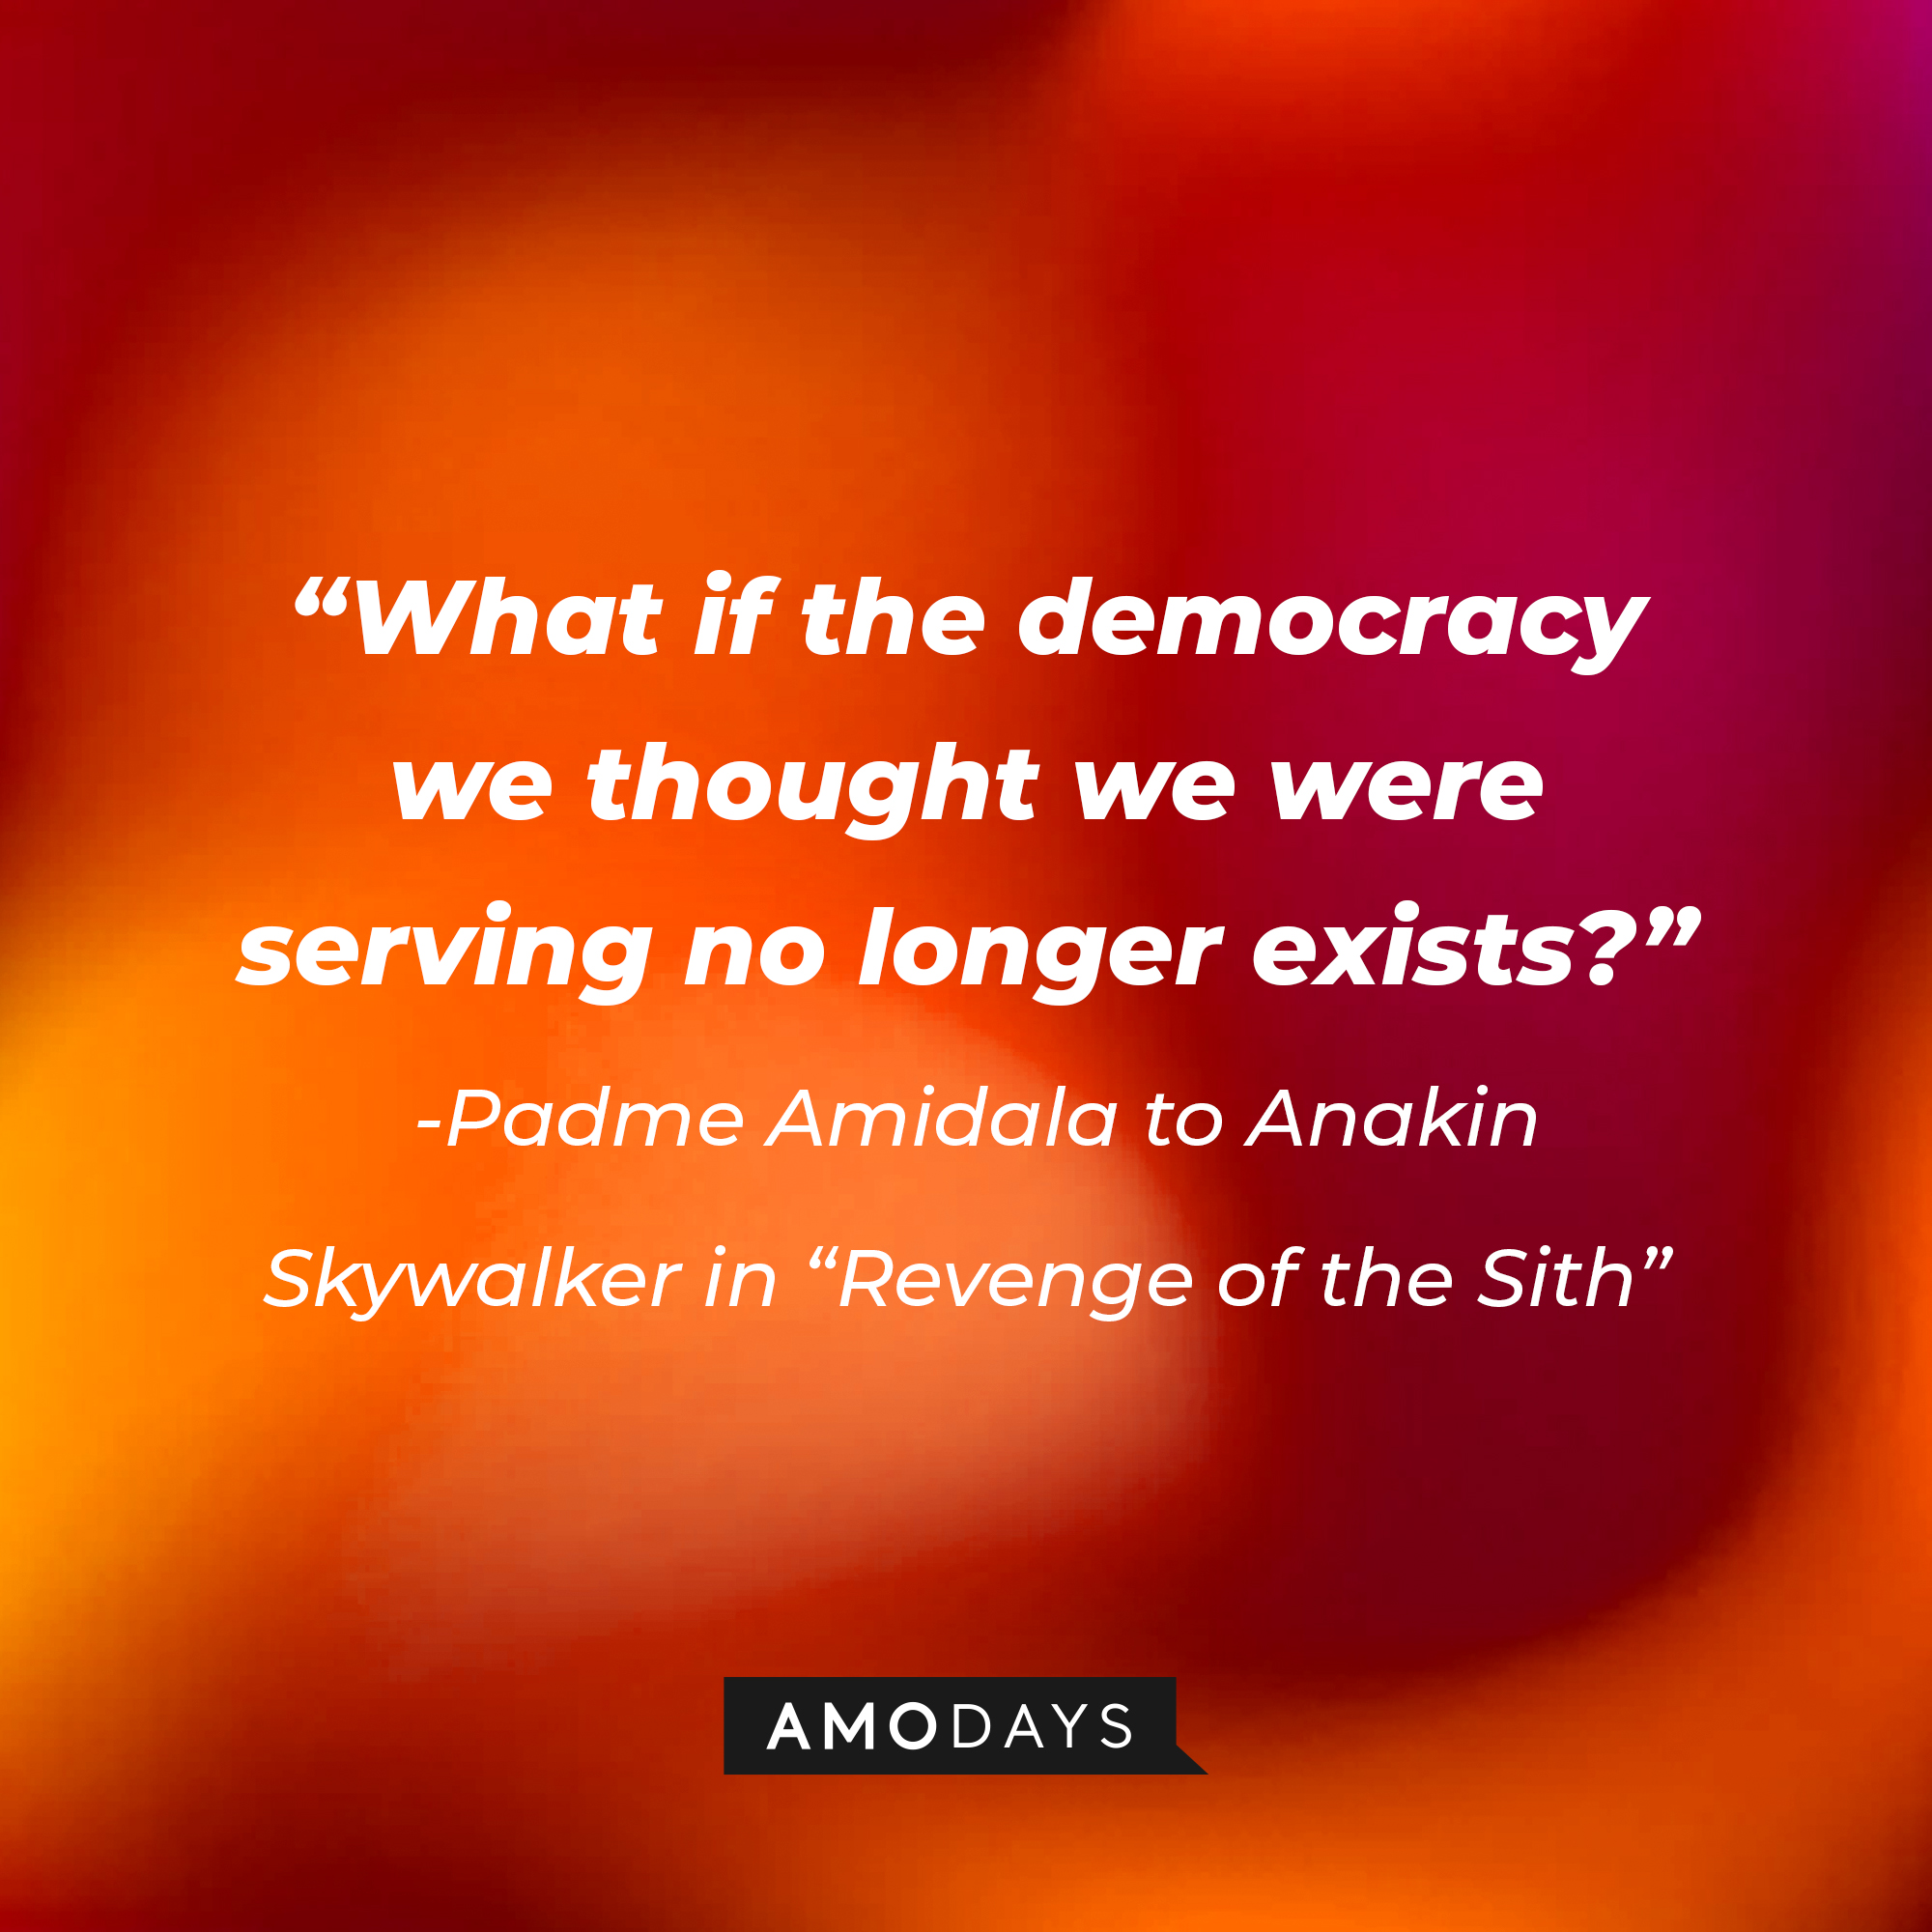 Padme Amidala's quote: "What if the democracy we thought we were serving no longer exists?" | Source: AmoDays